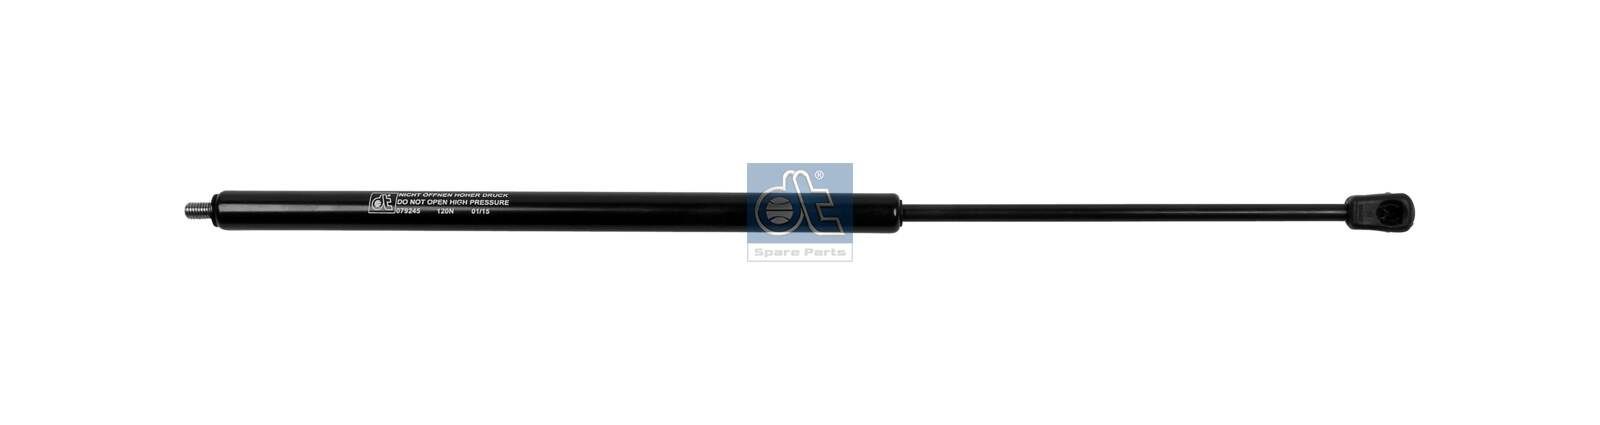 354684 DT Spare Parts 4.68014 Gas Spring A 000 988 15 01